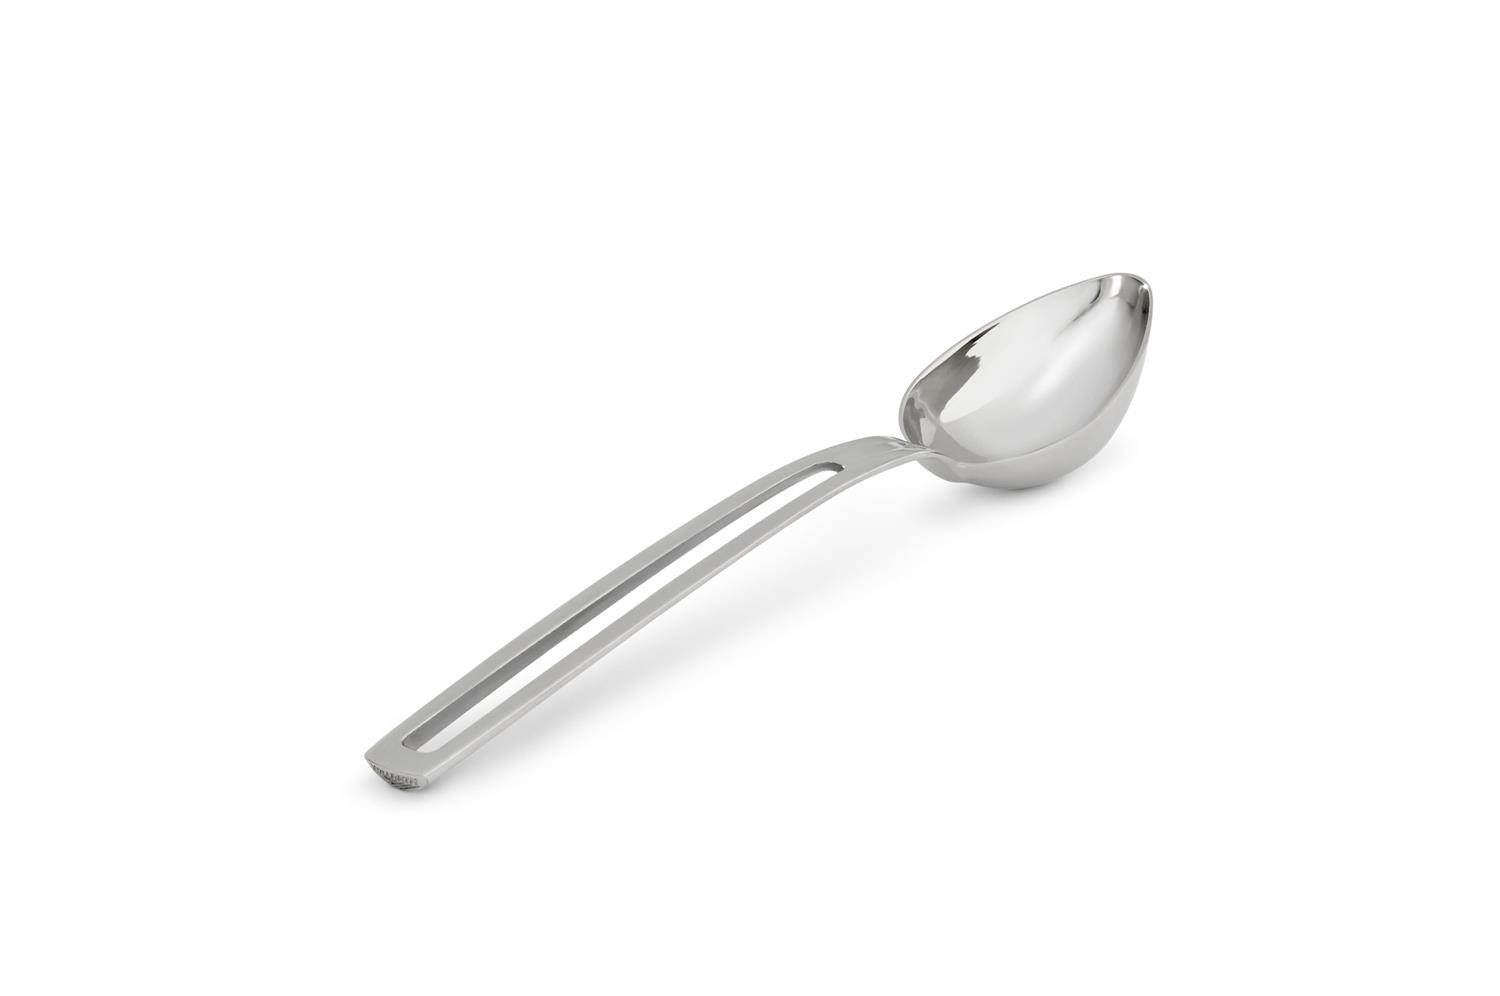 Vollrath 46721 Oval Serving Spoon, Solid Bowl, 2 oz